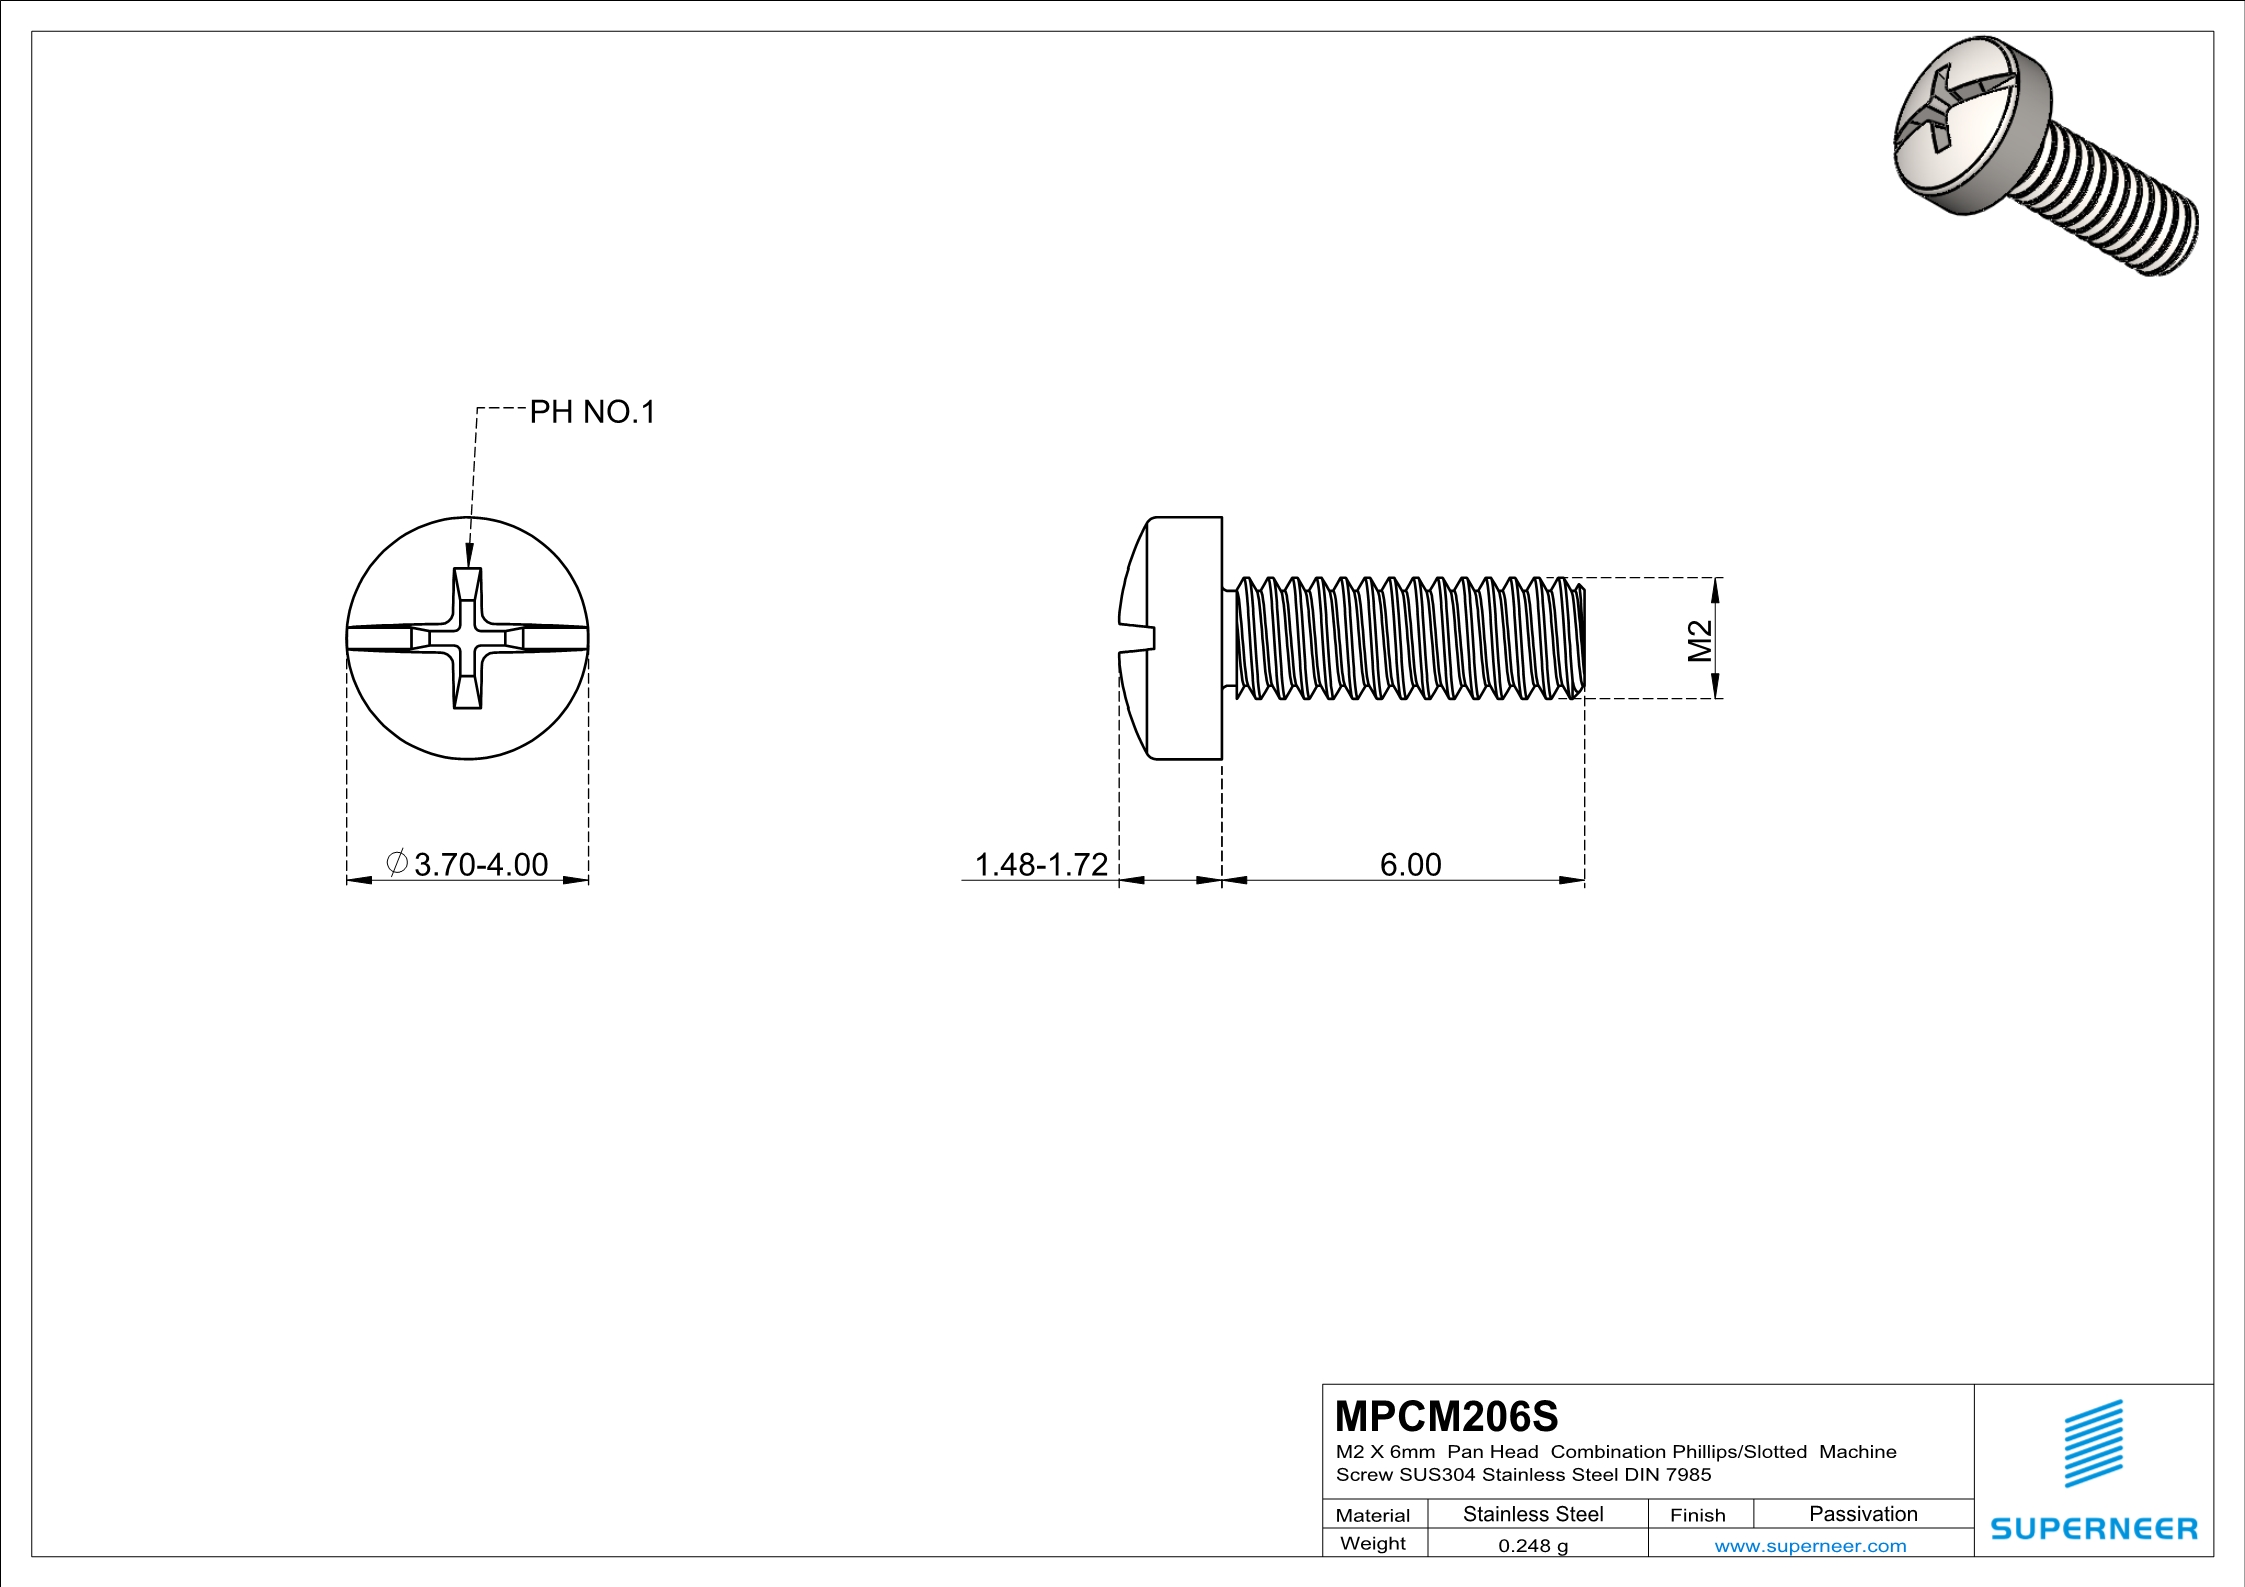 M2 x 6 mm  Pan Head  Combination Phillips/Slotted  Machine Screw SUS304 Stainless Steel Inox DIN 7985